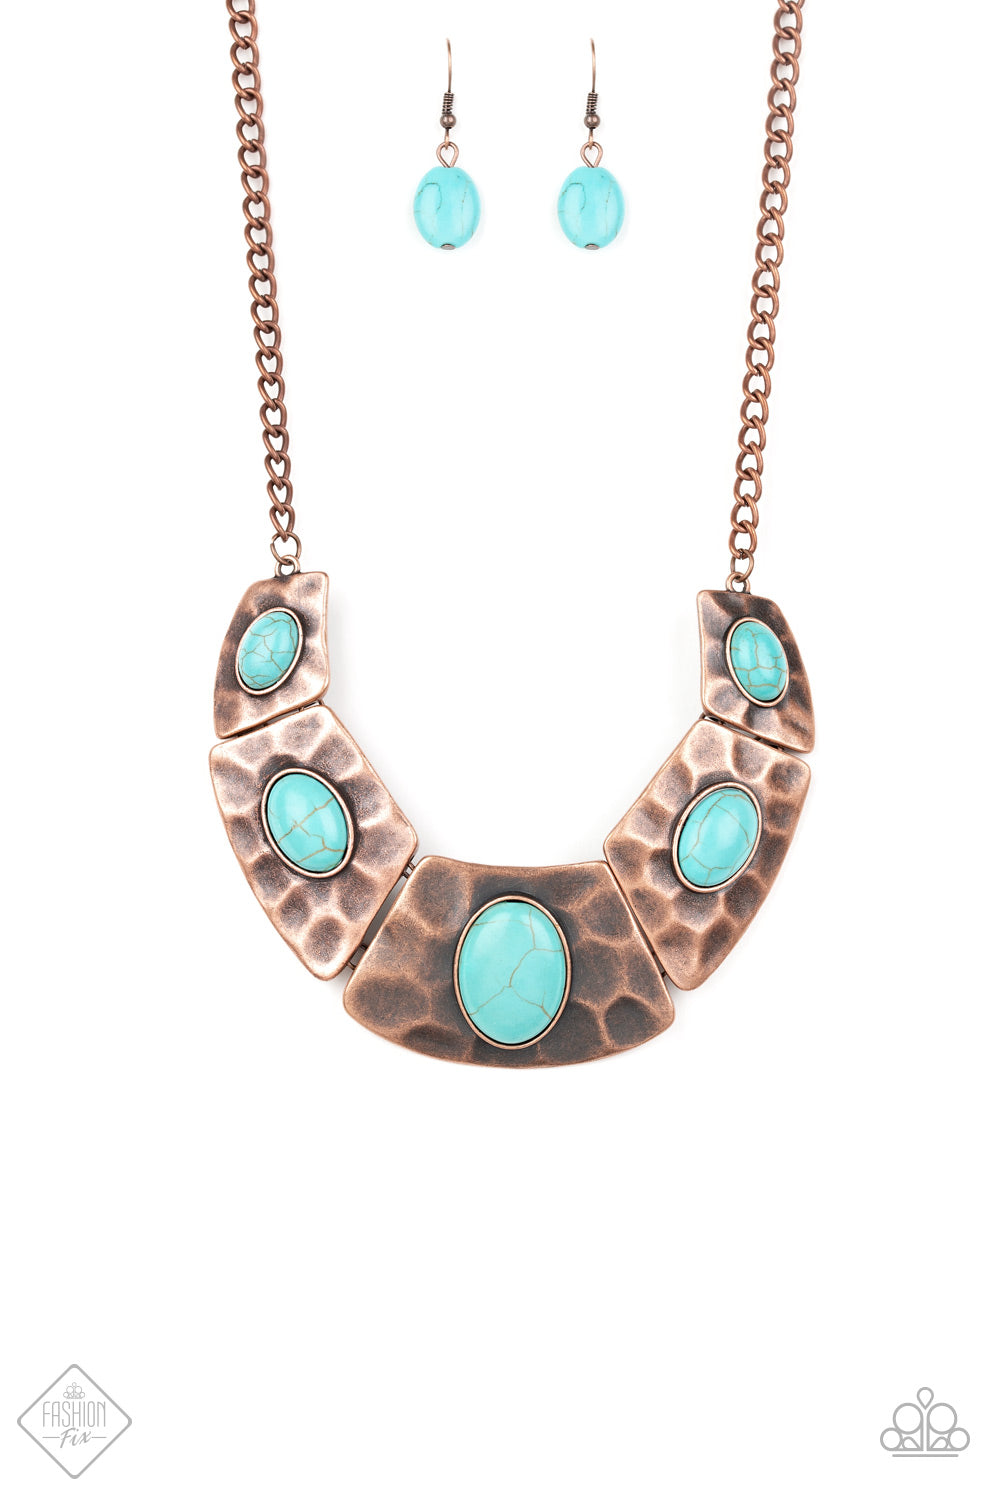 RULER IN FAVOR - COPPER BLUE TURQUOISE CRESCENT NECKLACE